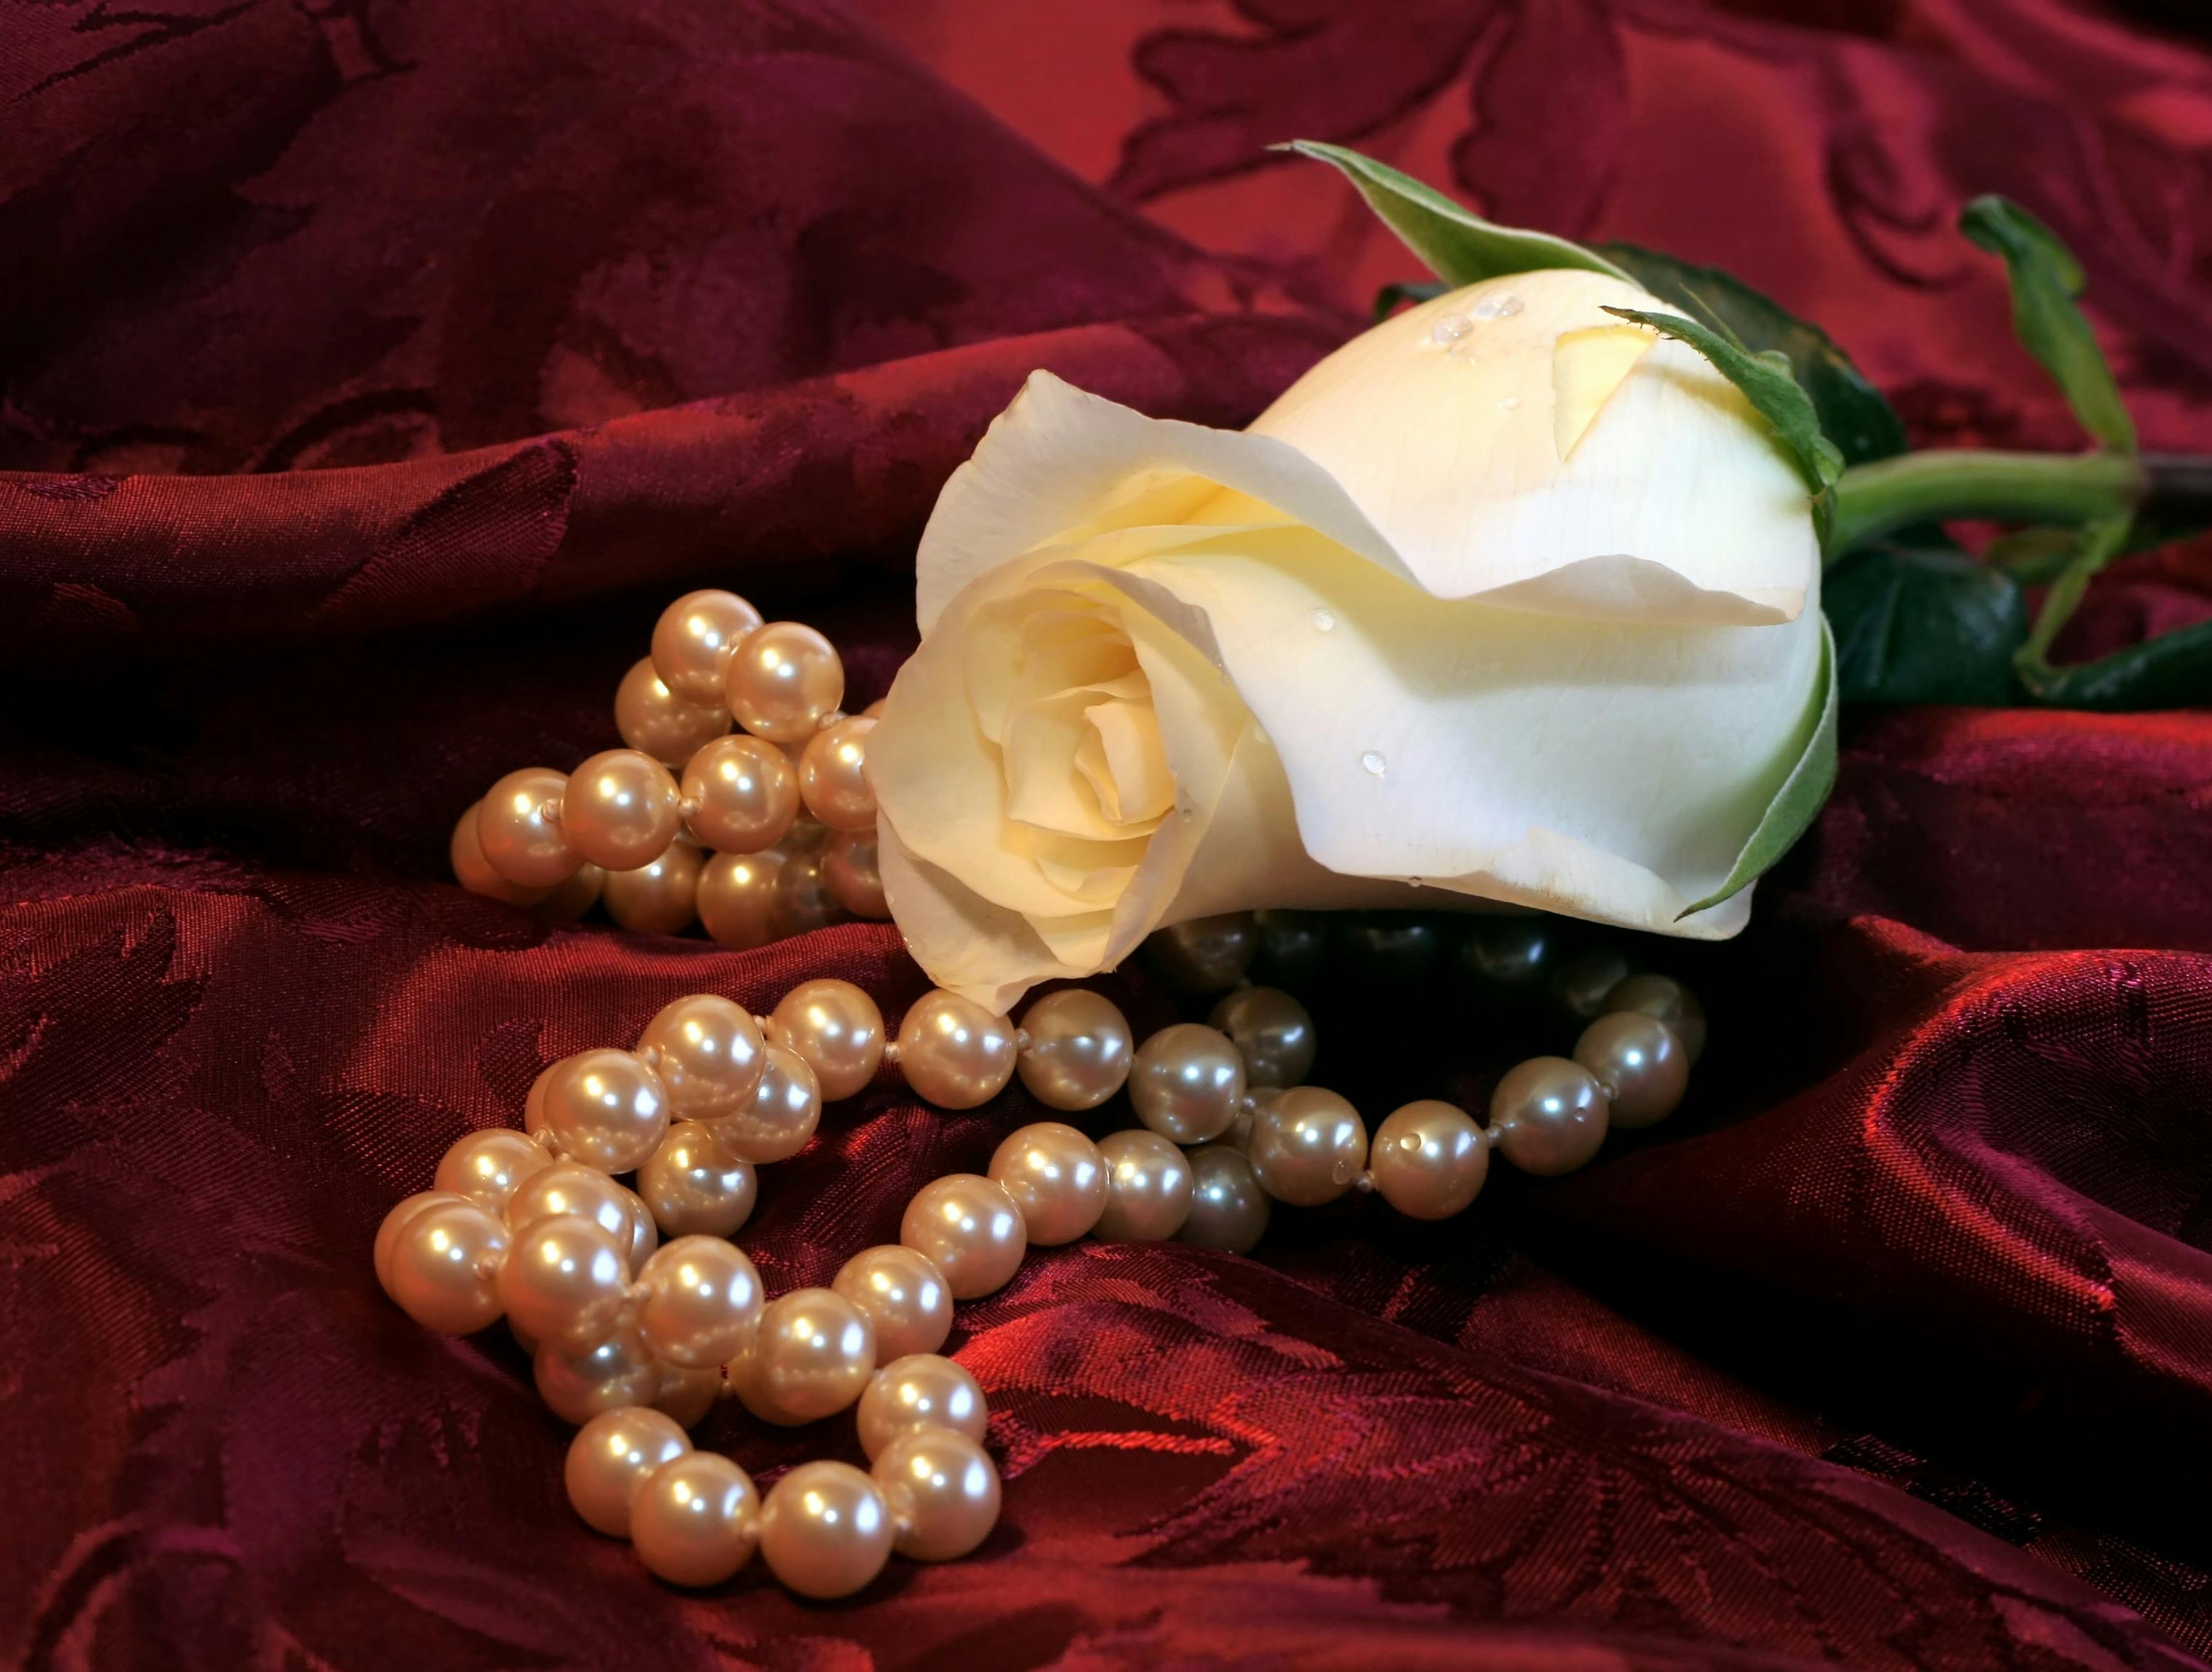 Beautiful white rose and strand of pearls on red satin